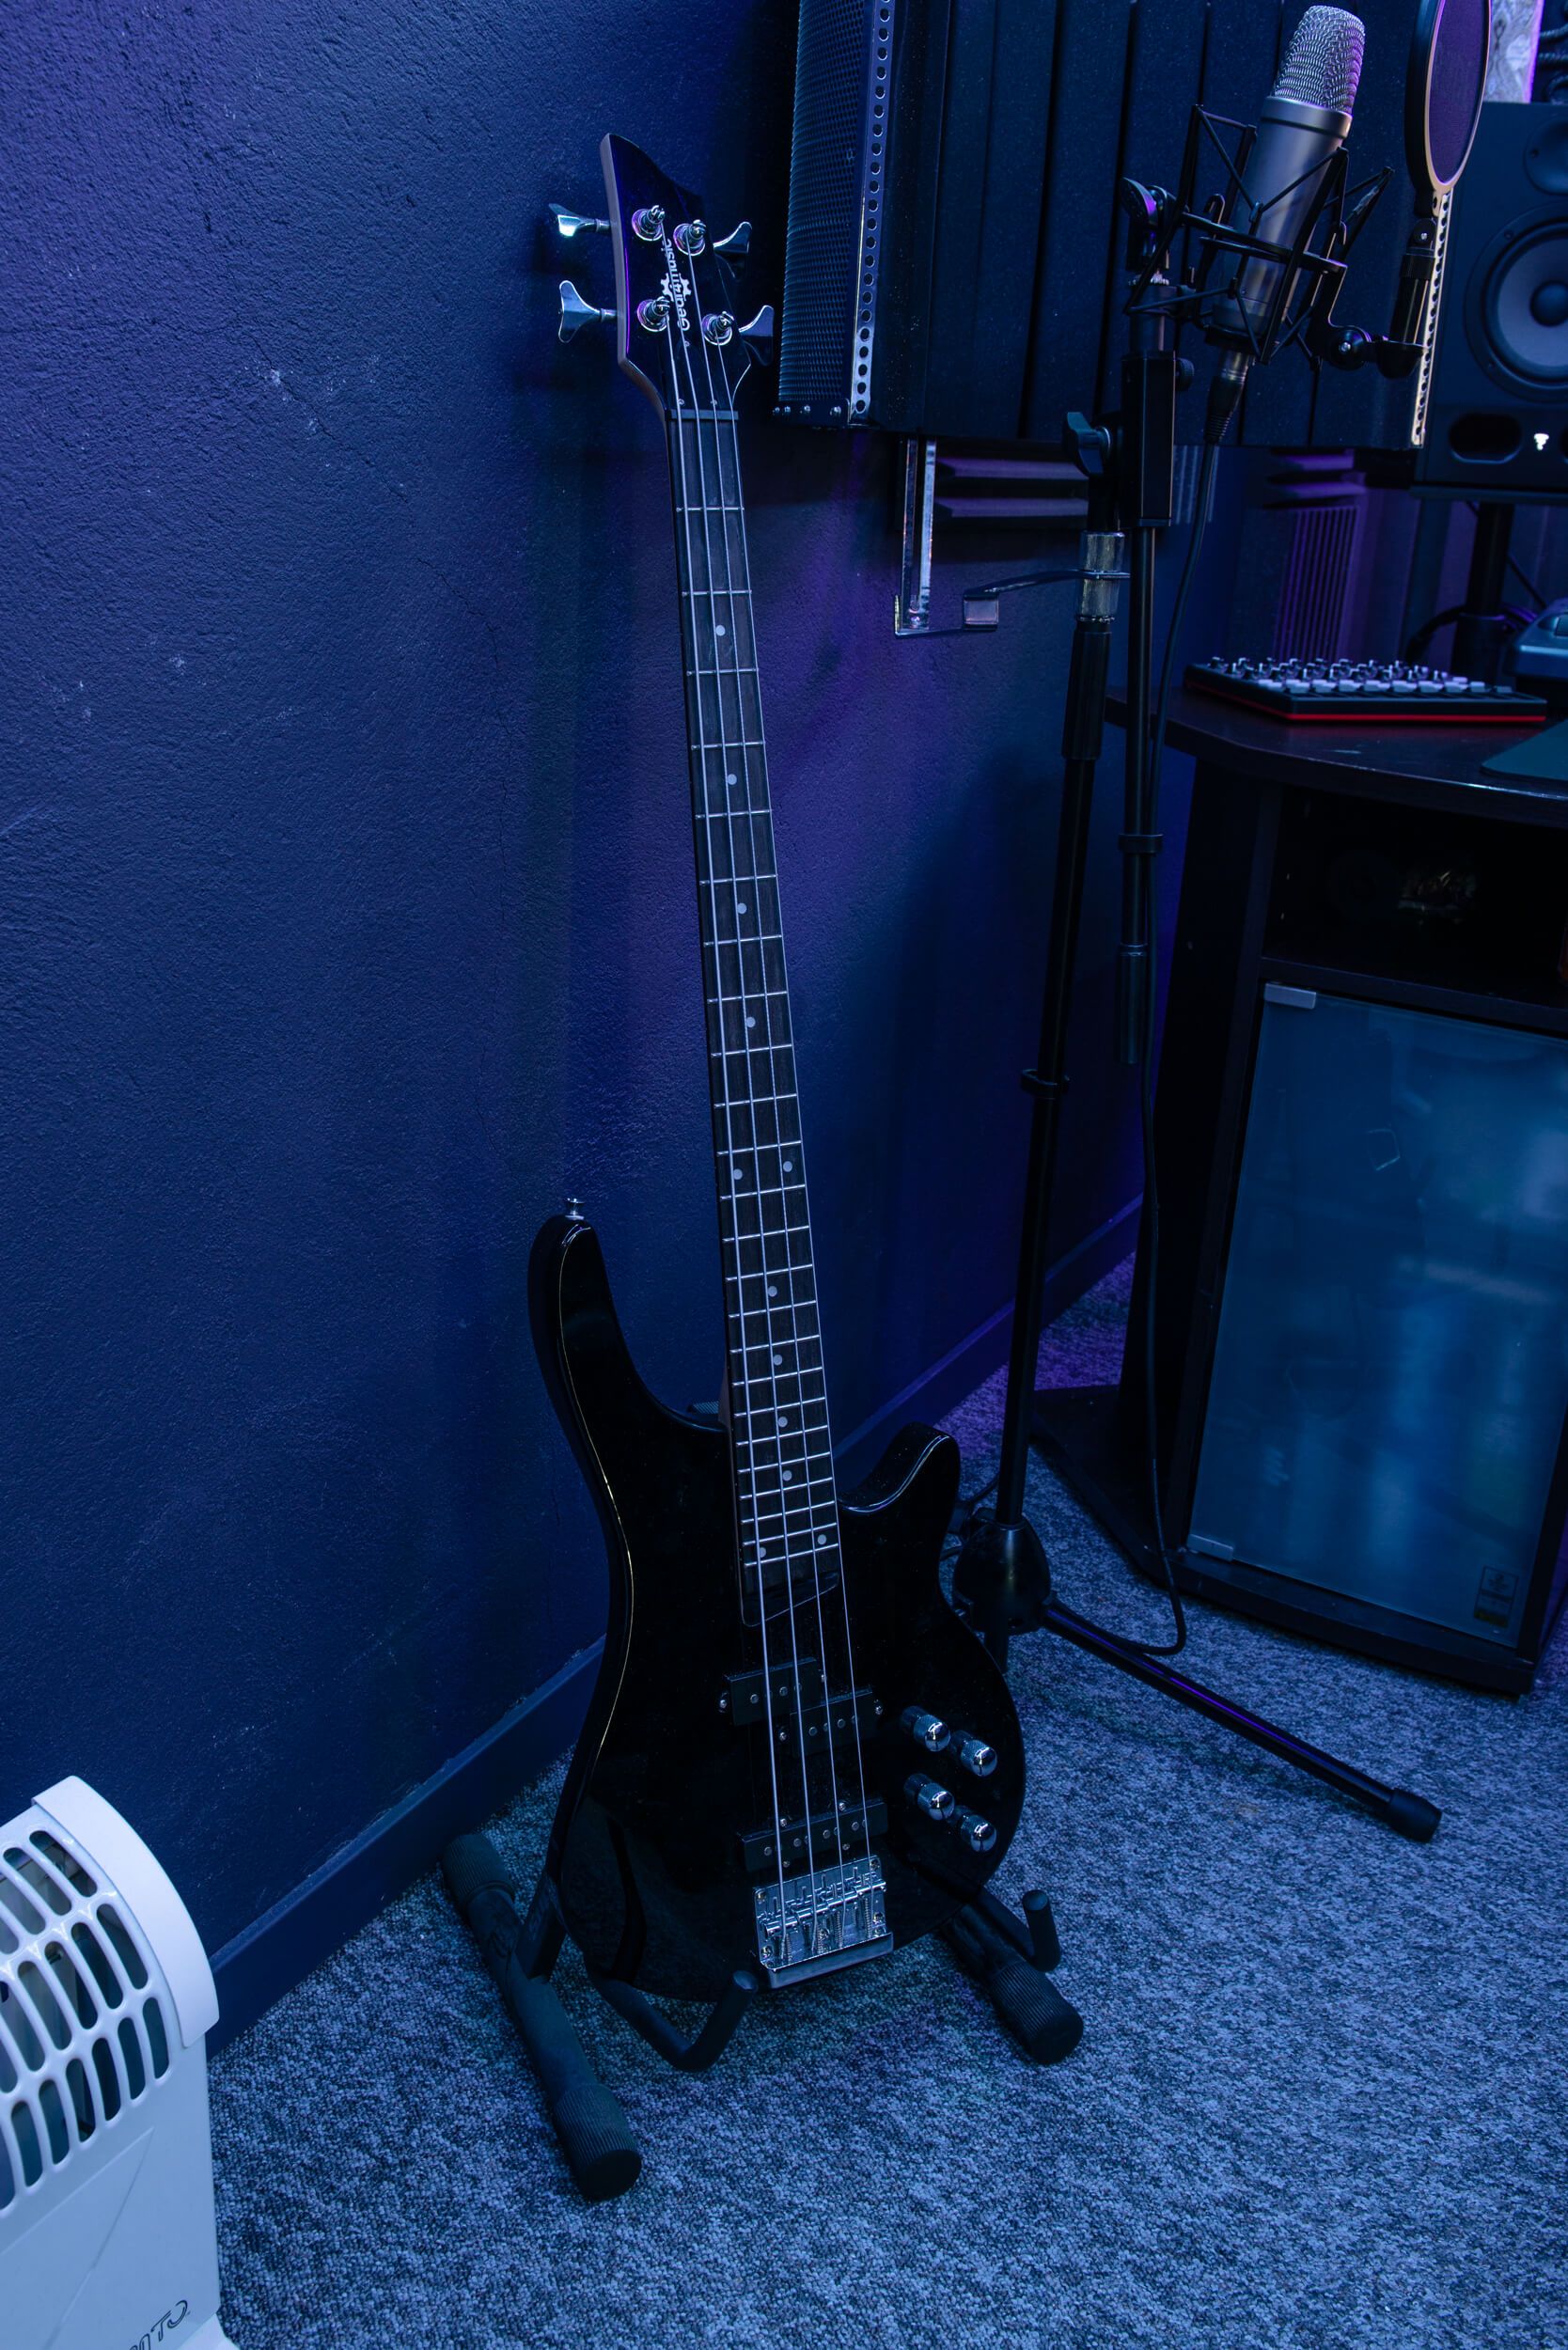 Joakim usually plays the bass on its own without an amp or any additional equipment